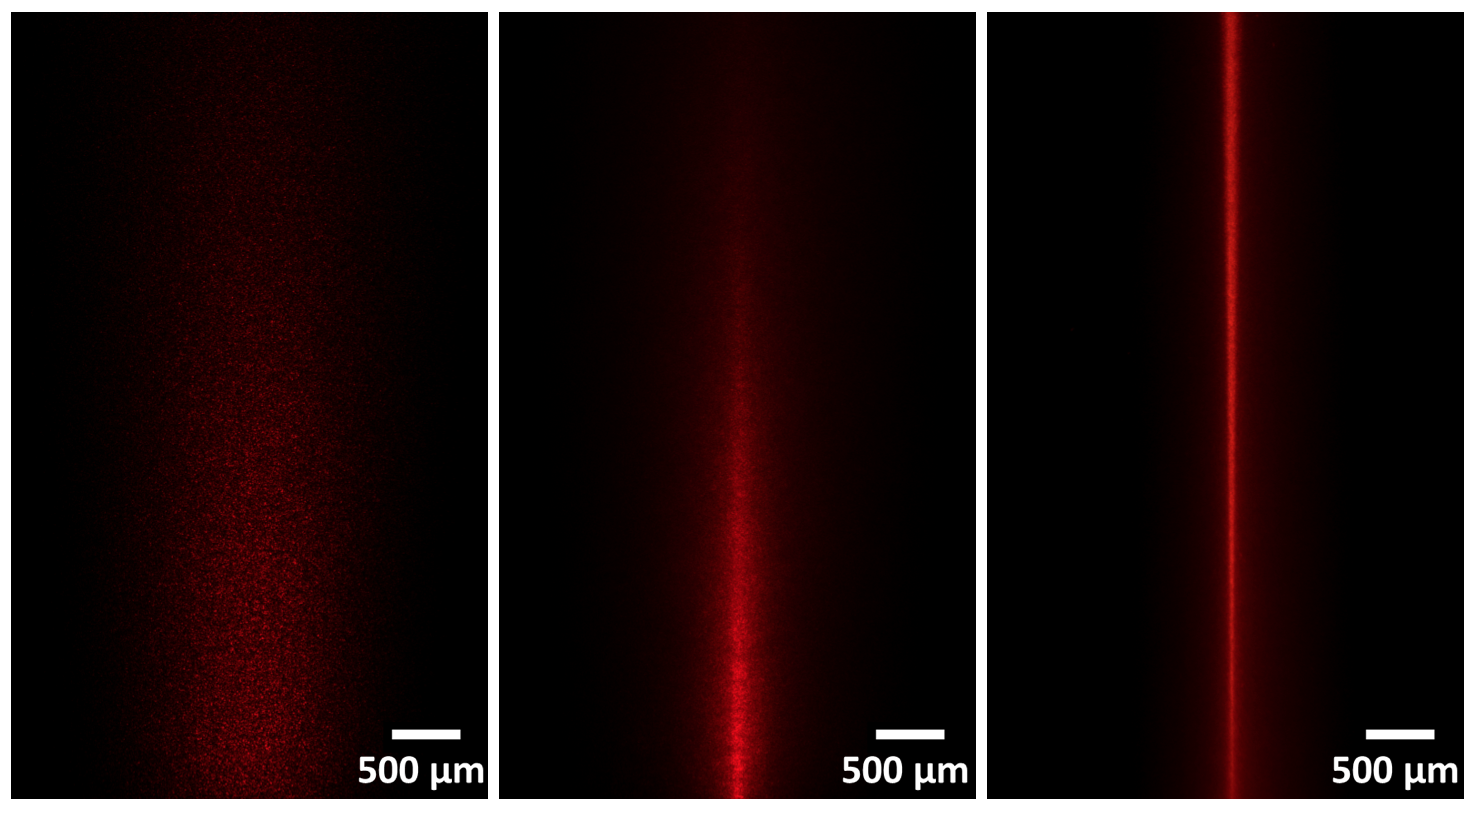 Three images showing, on the left, the most dispersion and on the right the least.